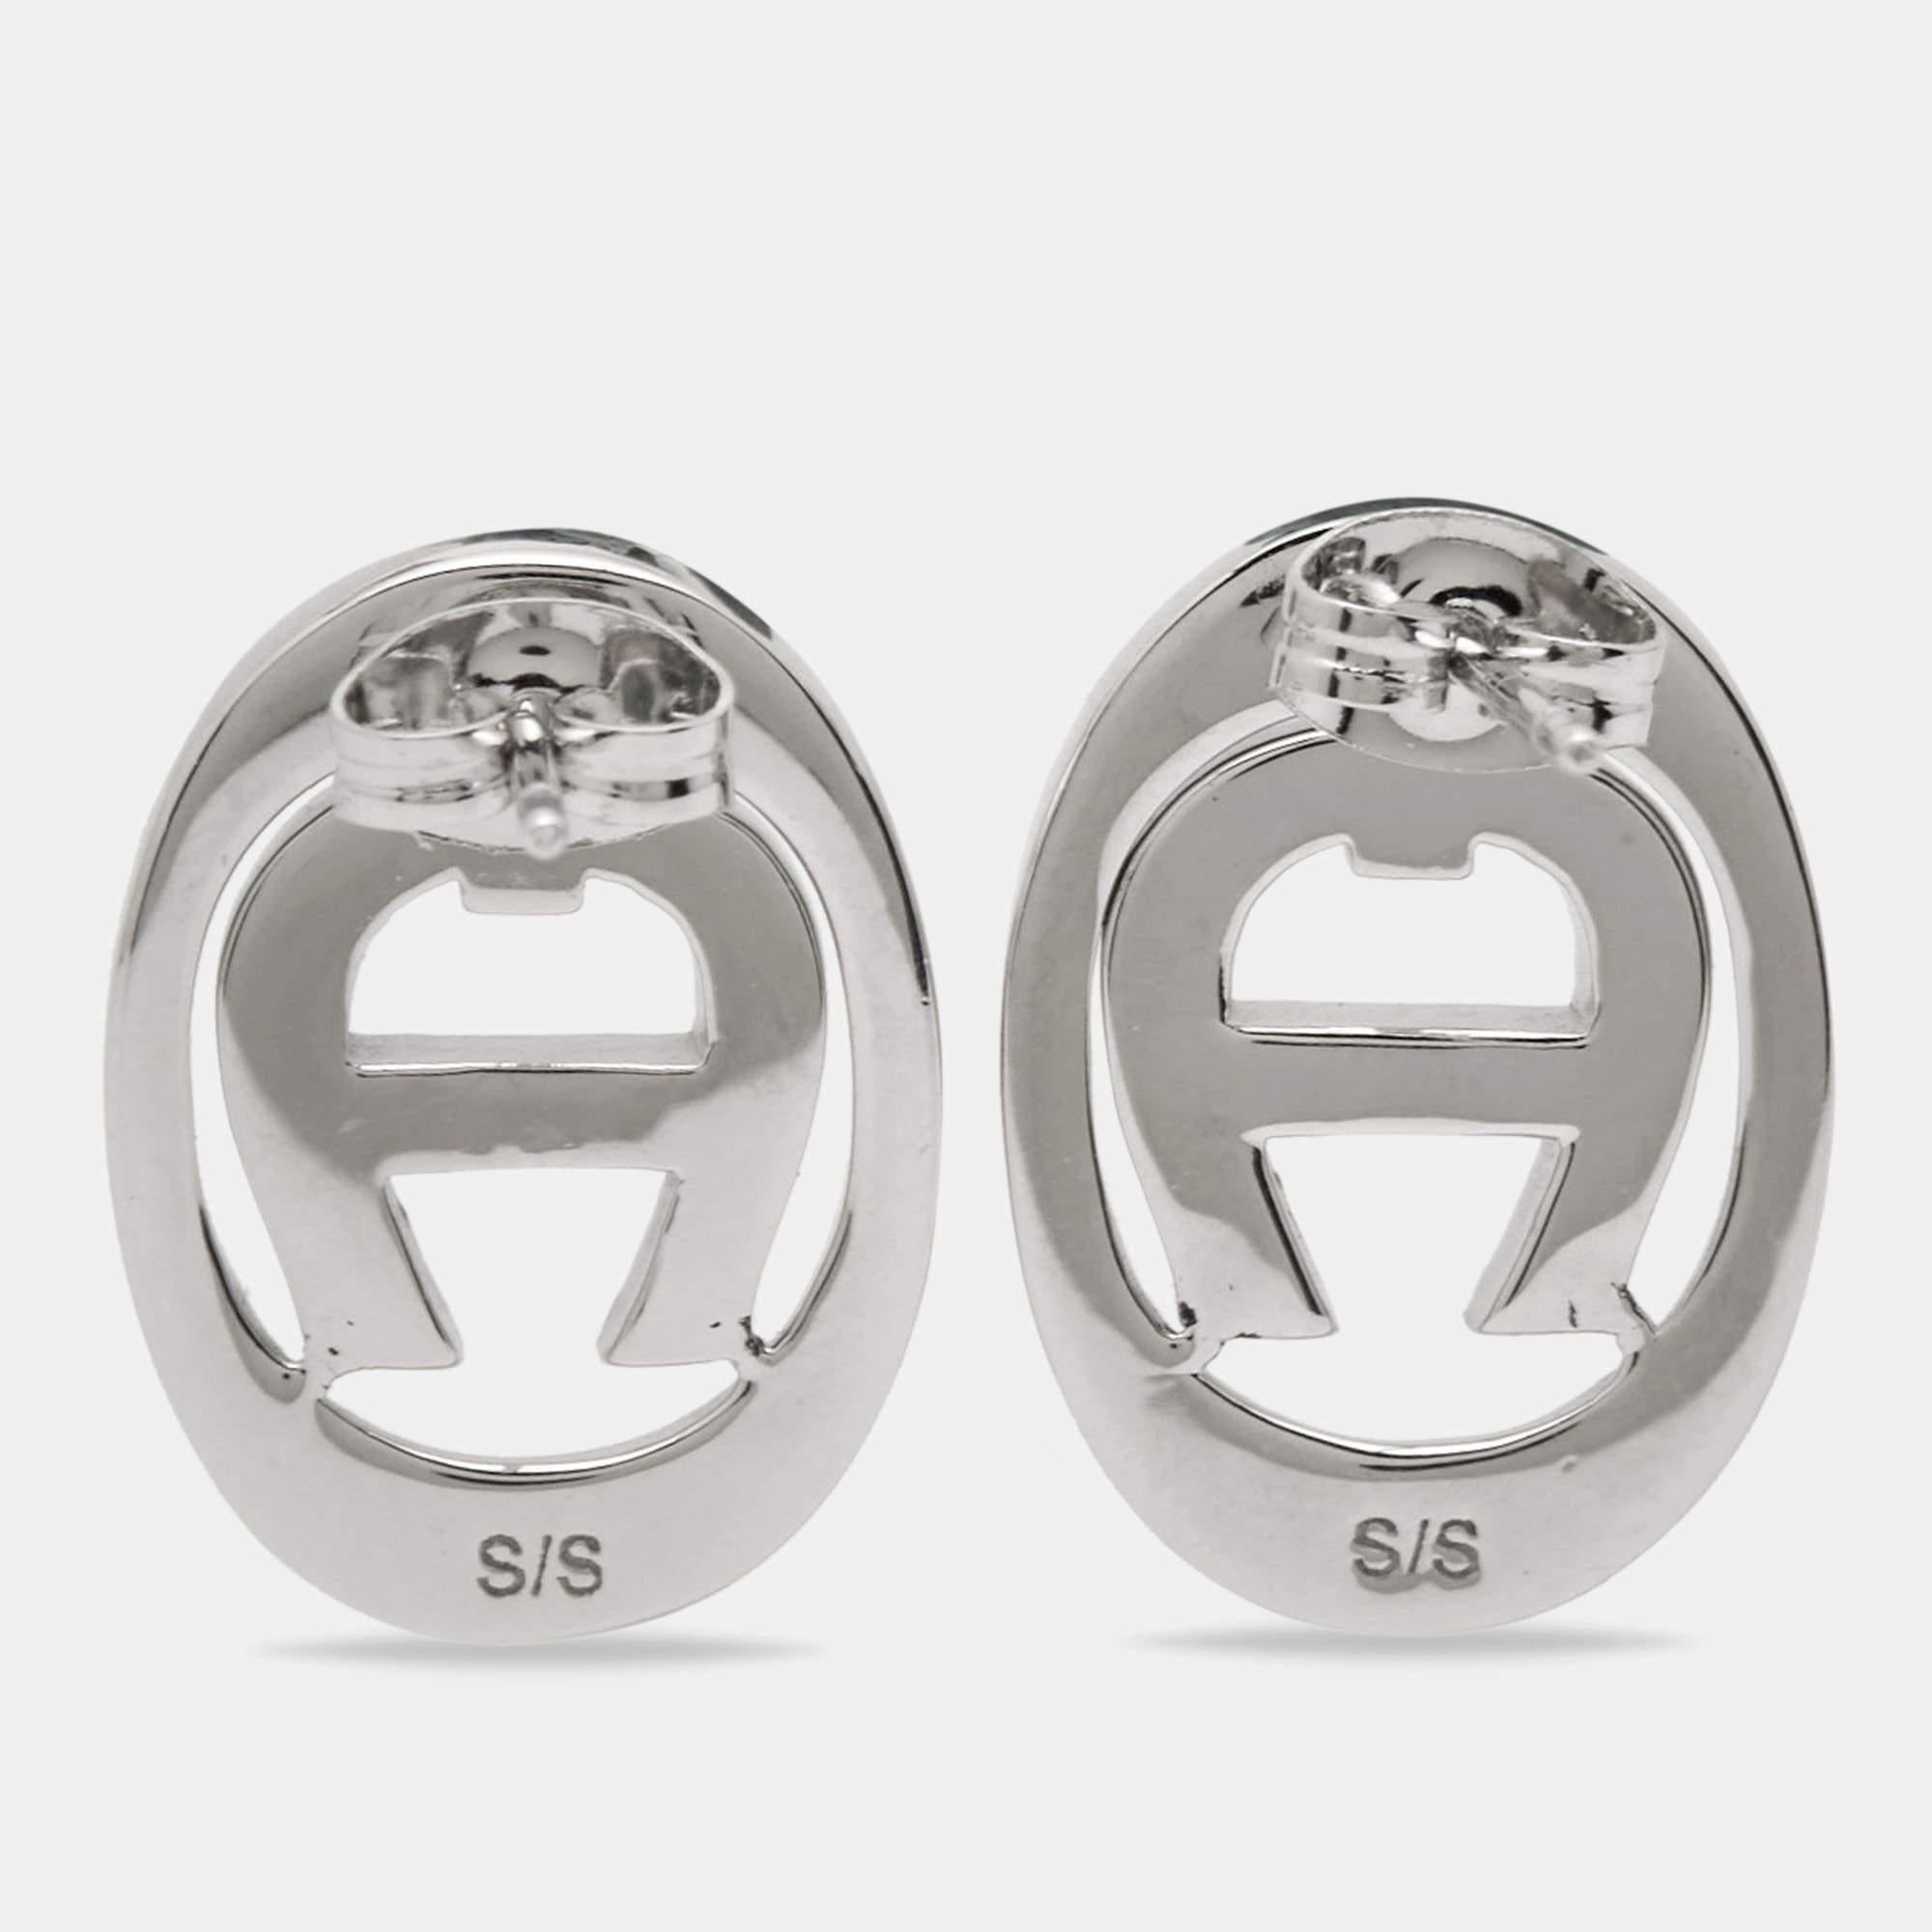 Uncut Aigner Crystals Silver Tone Earrings For Sale